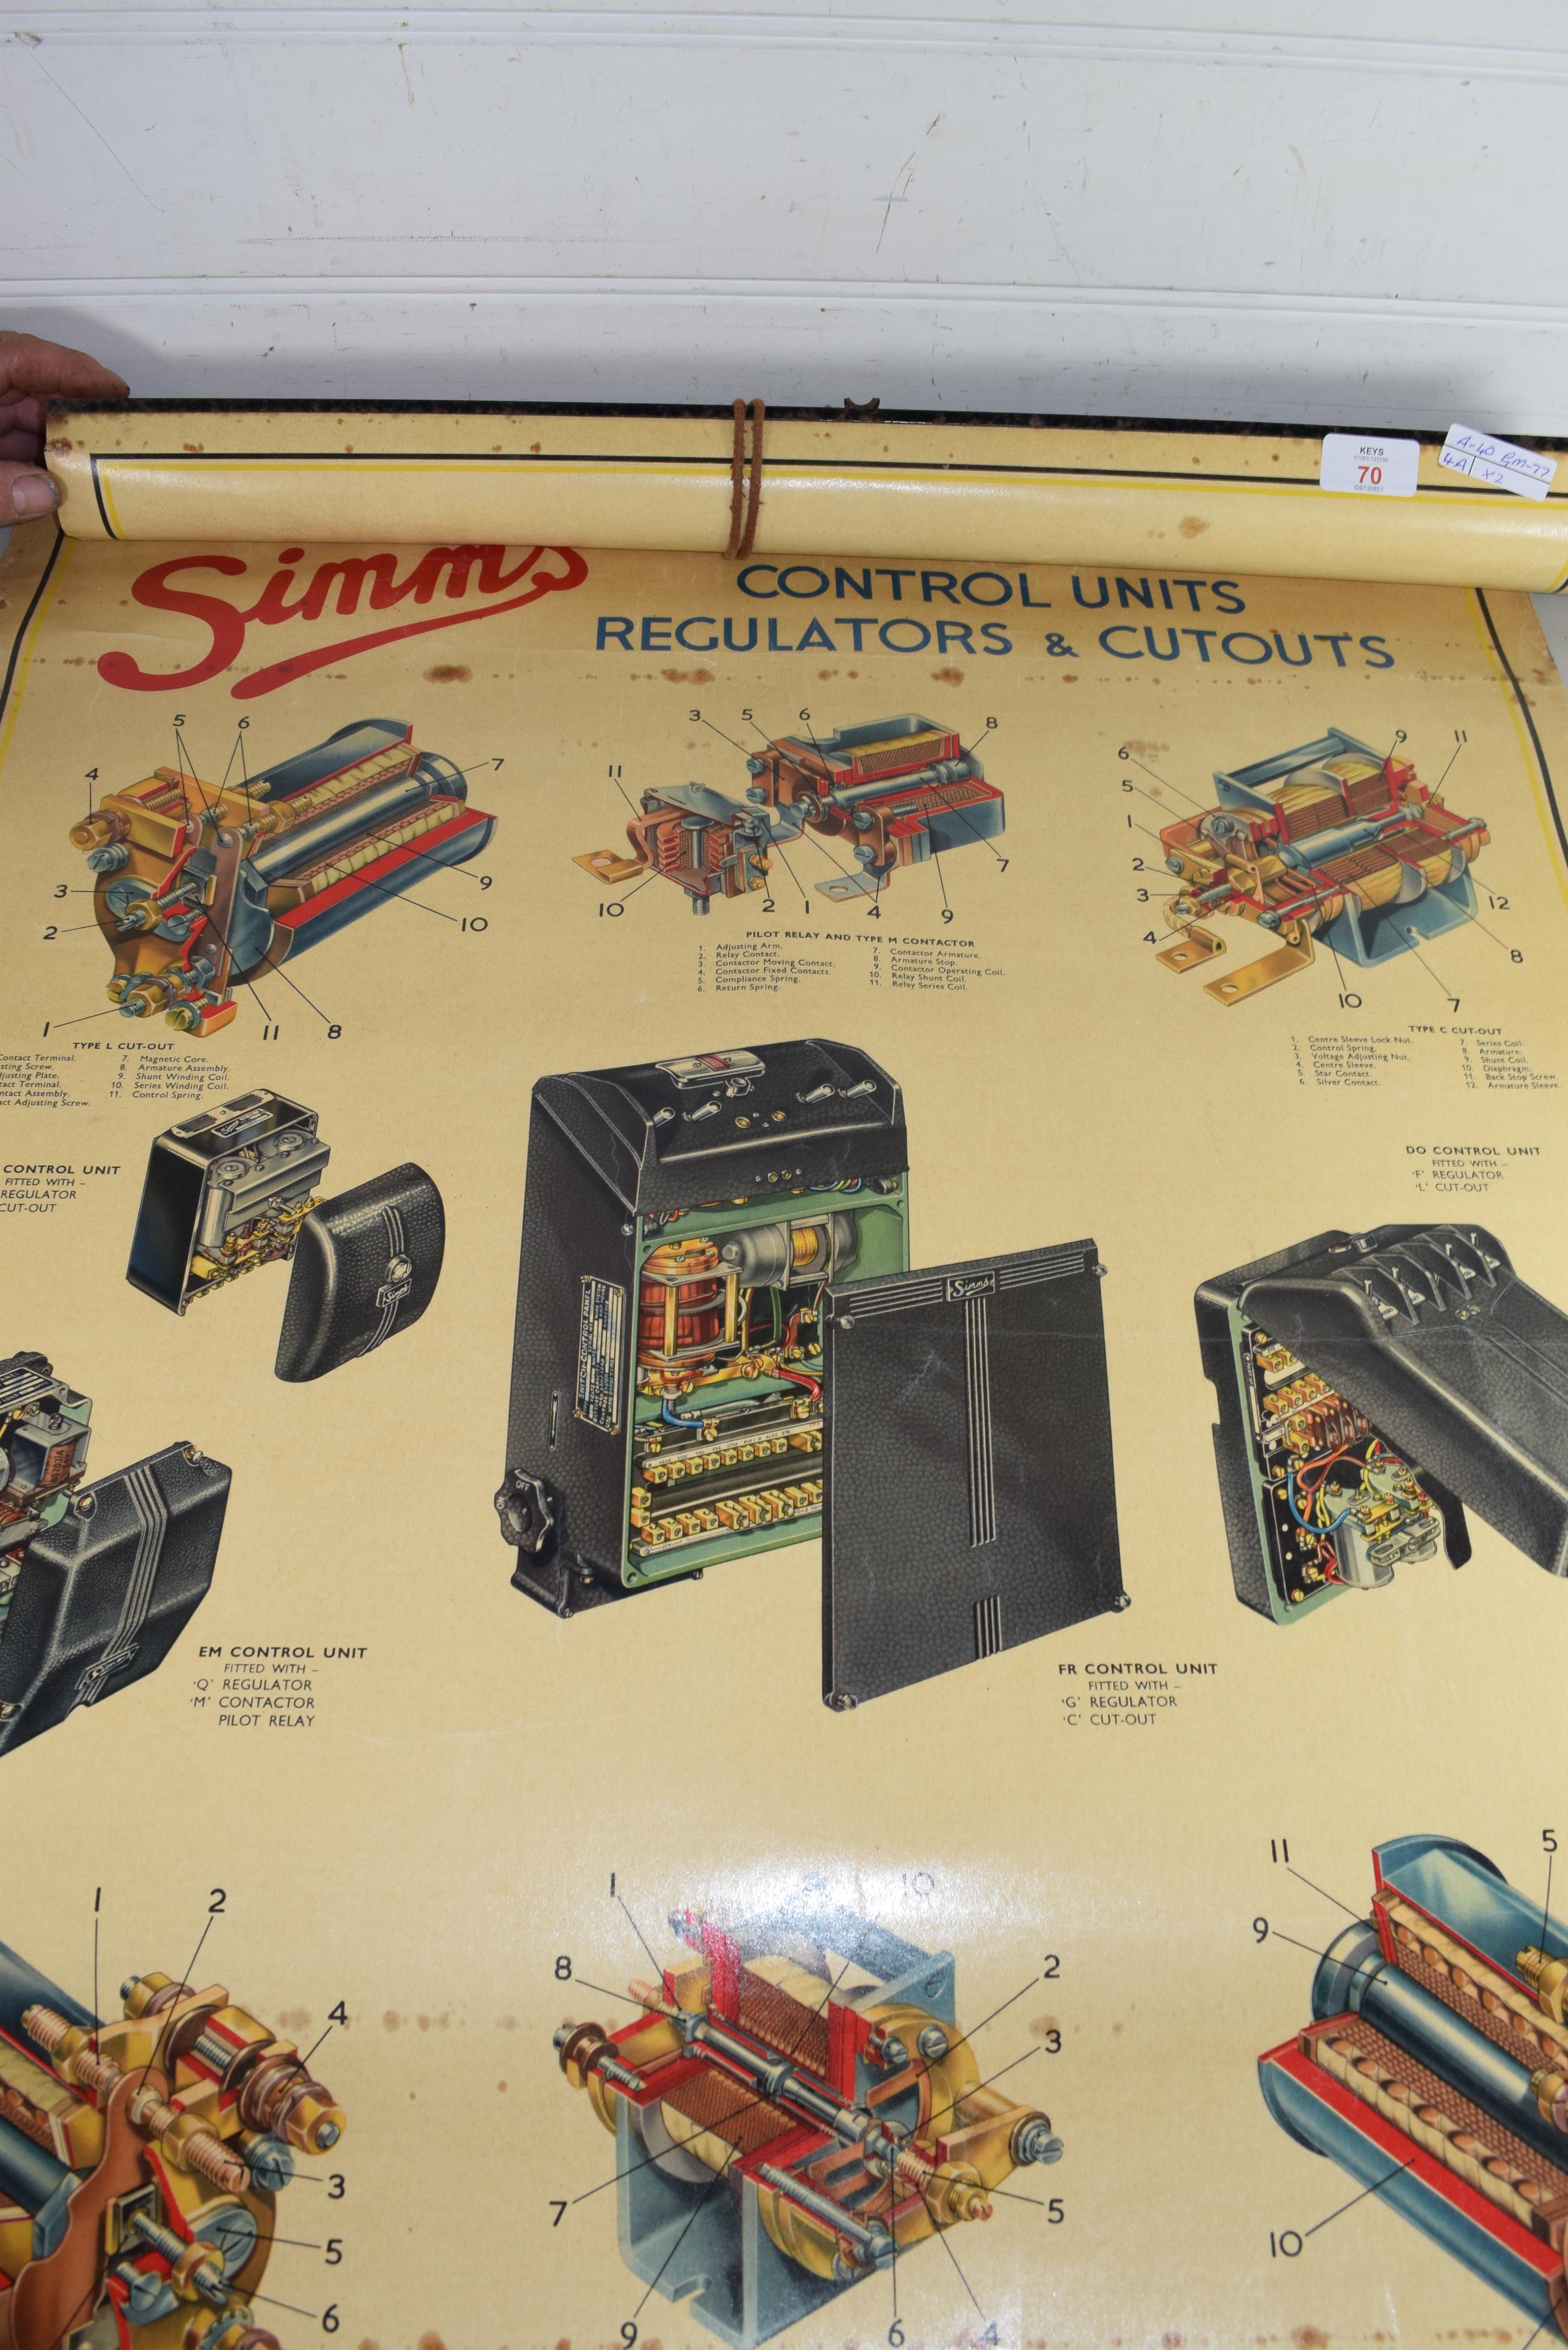 VINTAGE ADVERTISING TWO POSTERS FOR SIMMS DYNAMOS AND CONTROL UNITS REGULATORS AND CUT OUTS